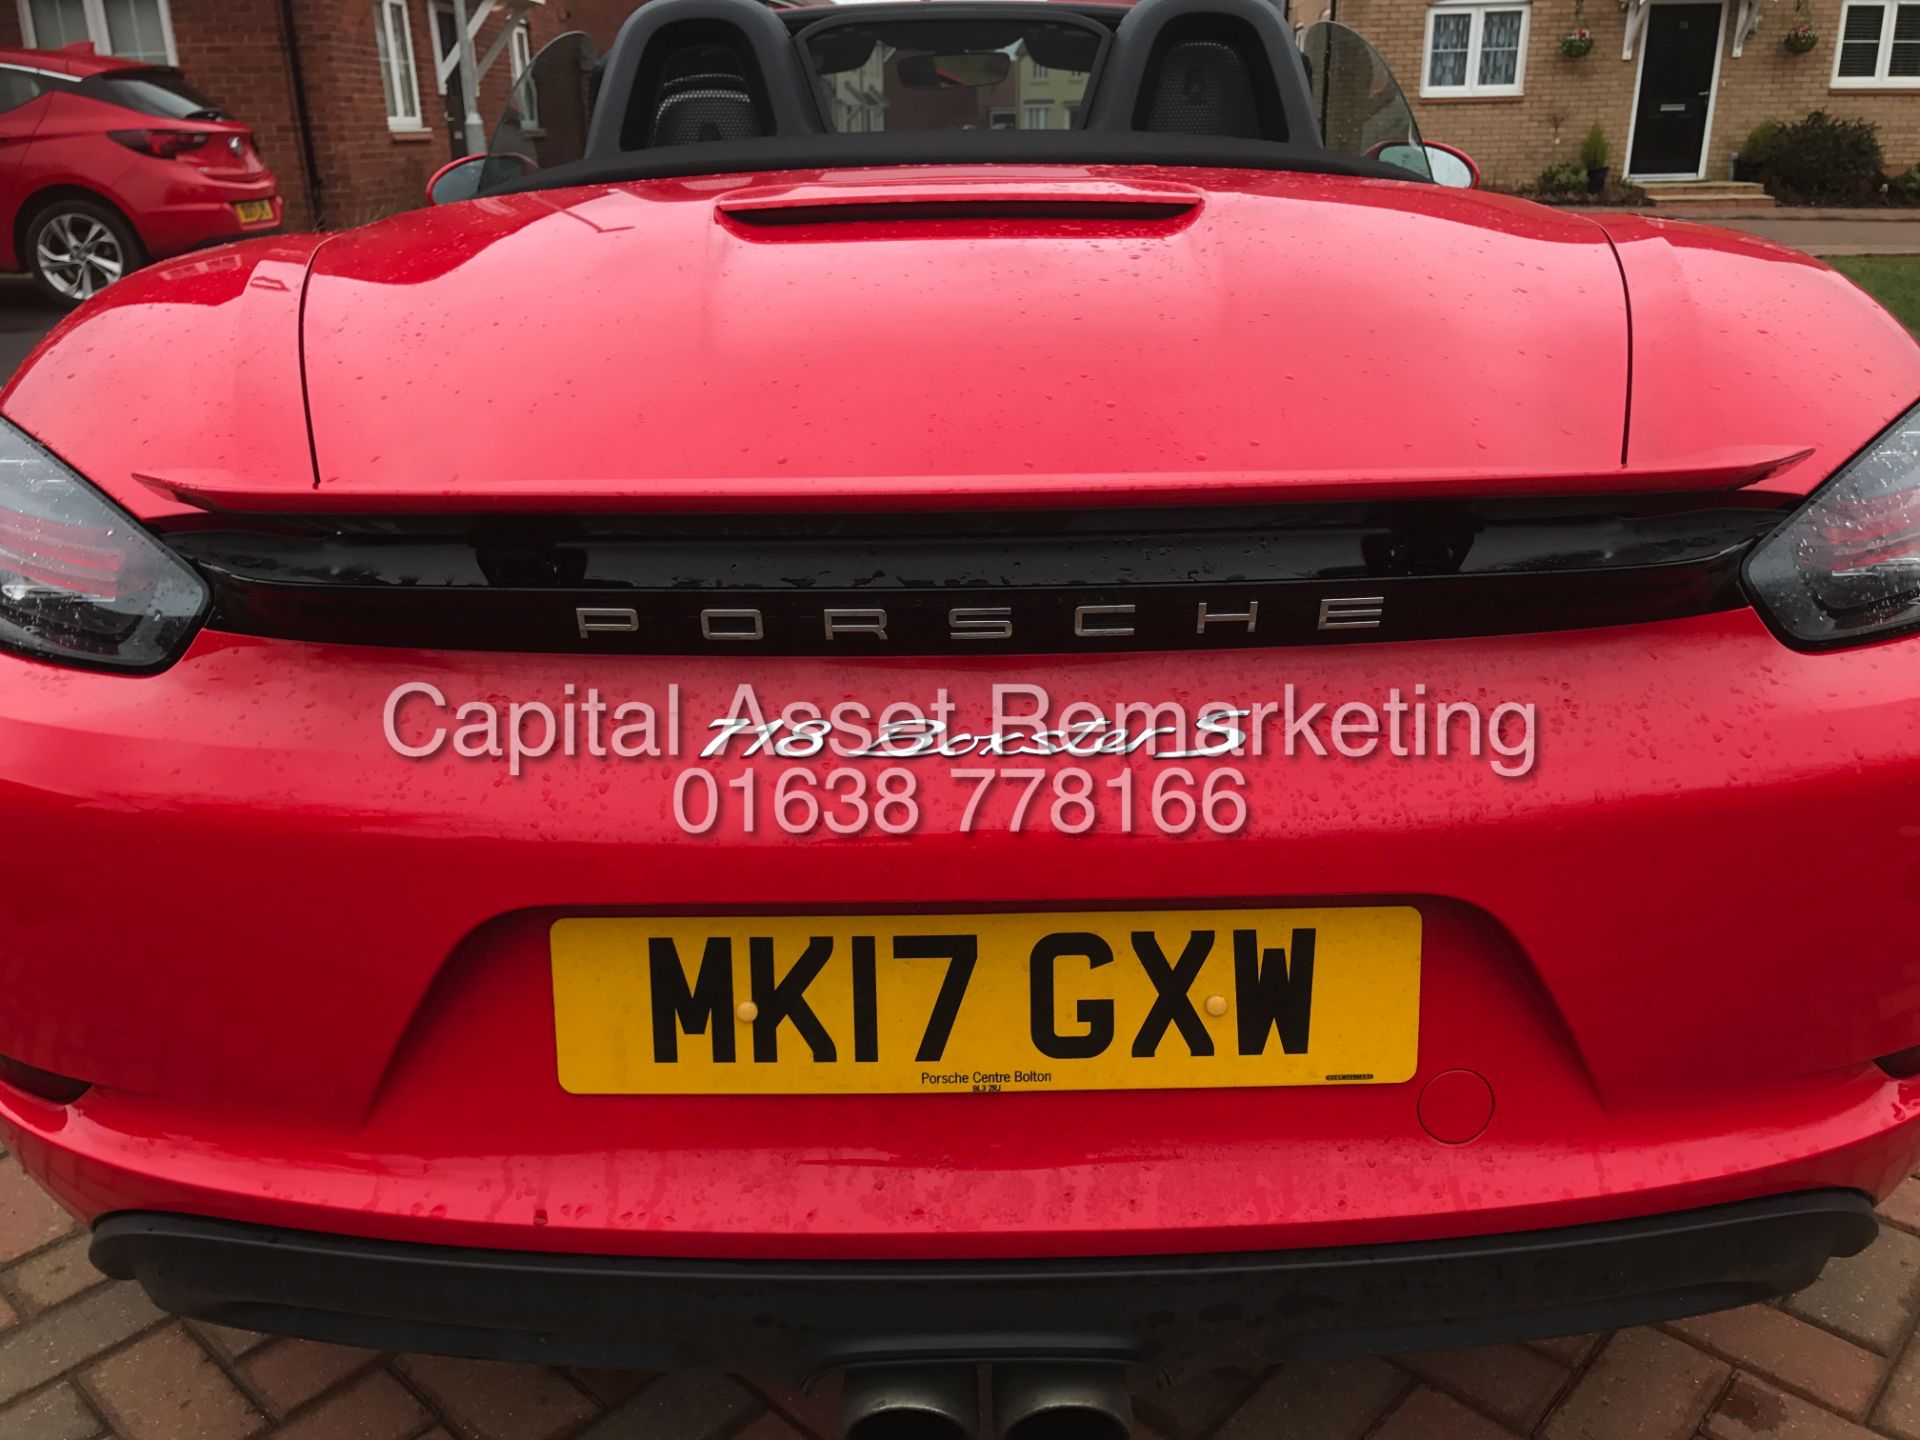 (ON SALE) PORSCHE BOXSTER S (718)CONVERTIBLE (17REG) NEW SHAPE-350 BHP-PDK AUTO' (1 OWNER-LOW MILES) - Image 21 of 34